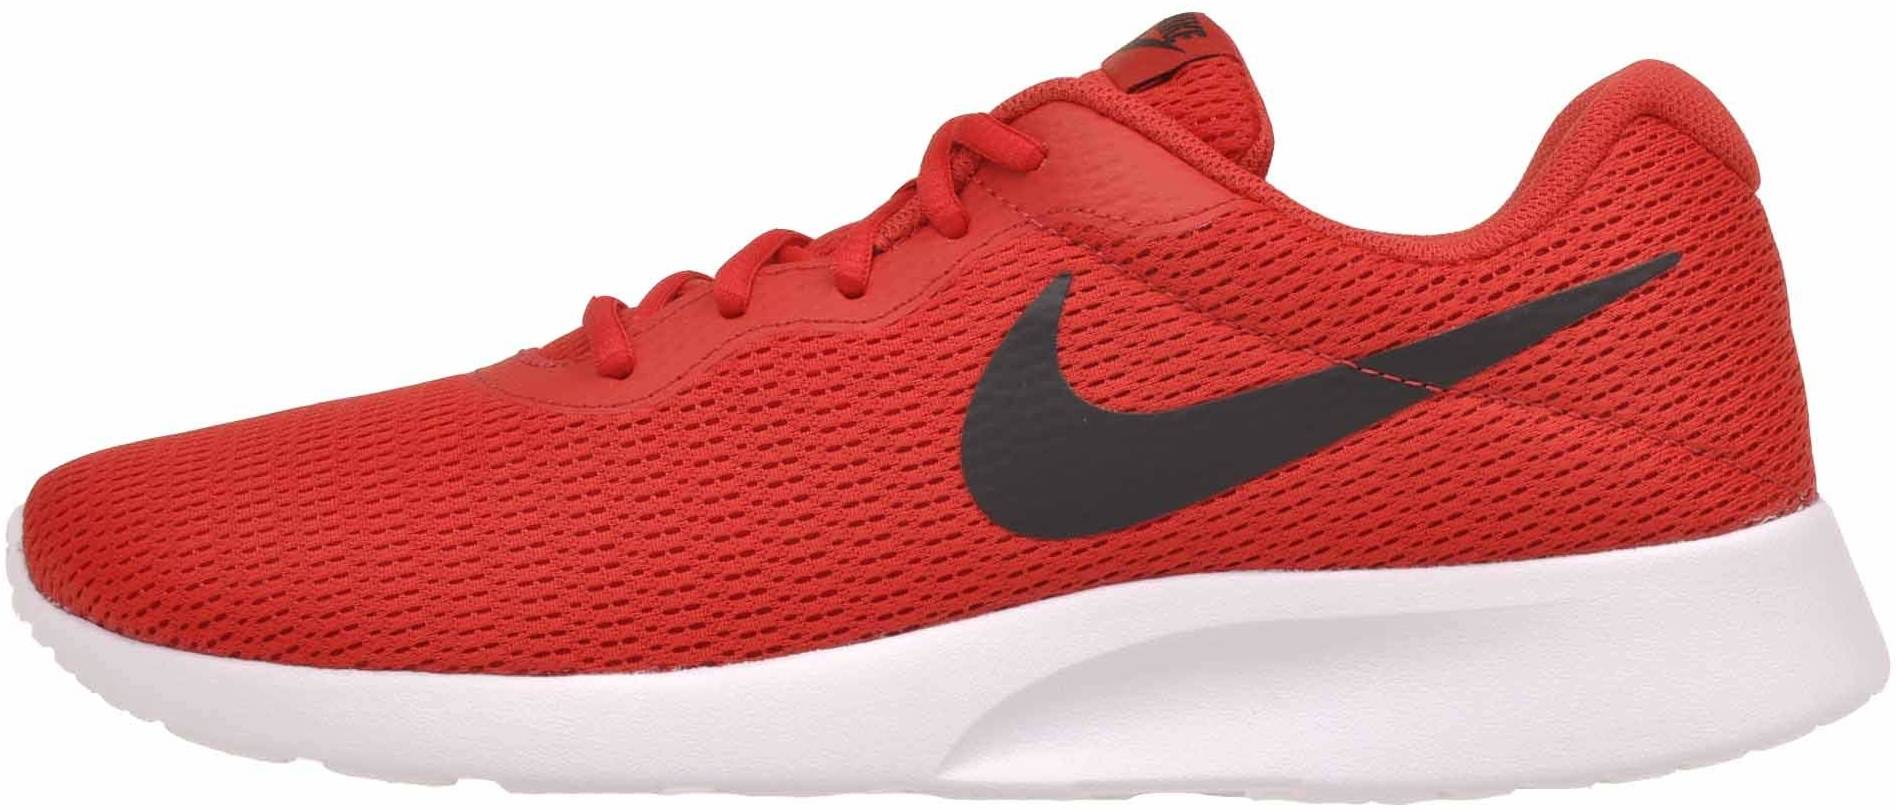 Save 44% on Red Nike Sneakers (87 